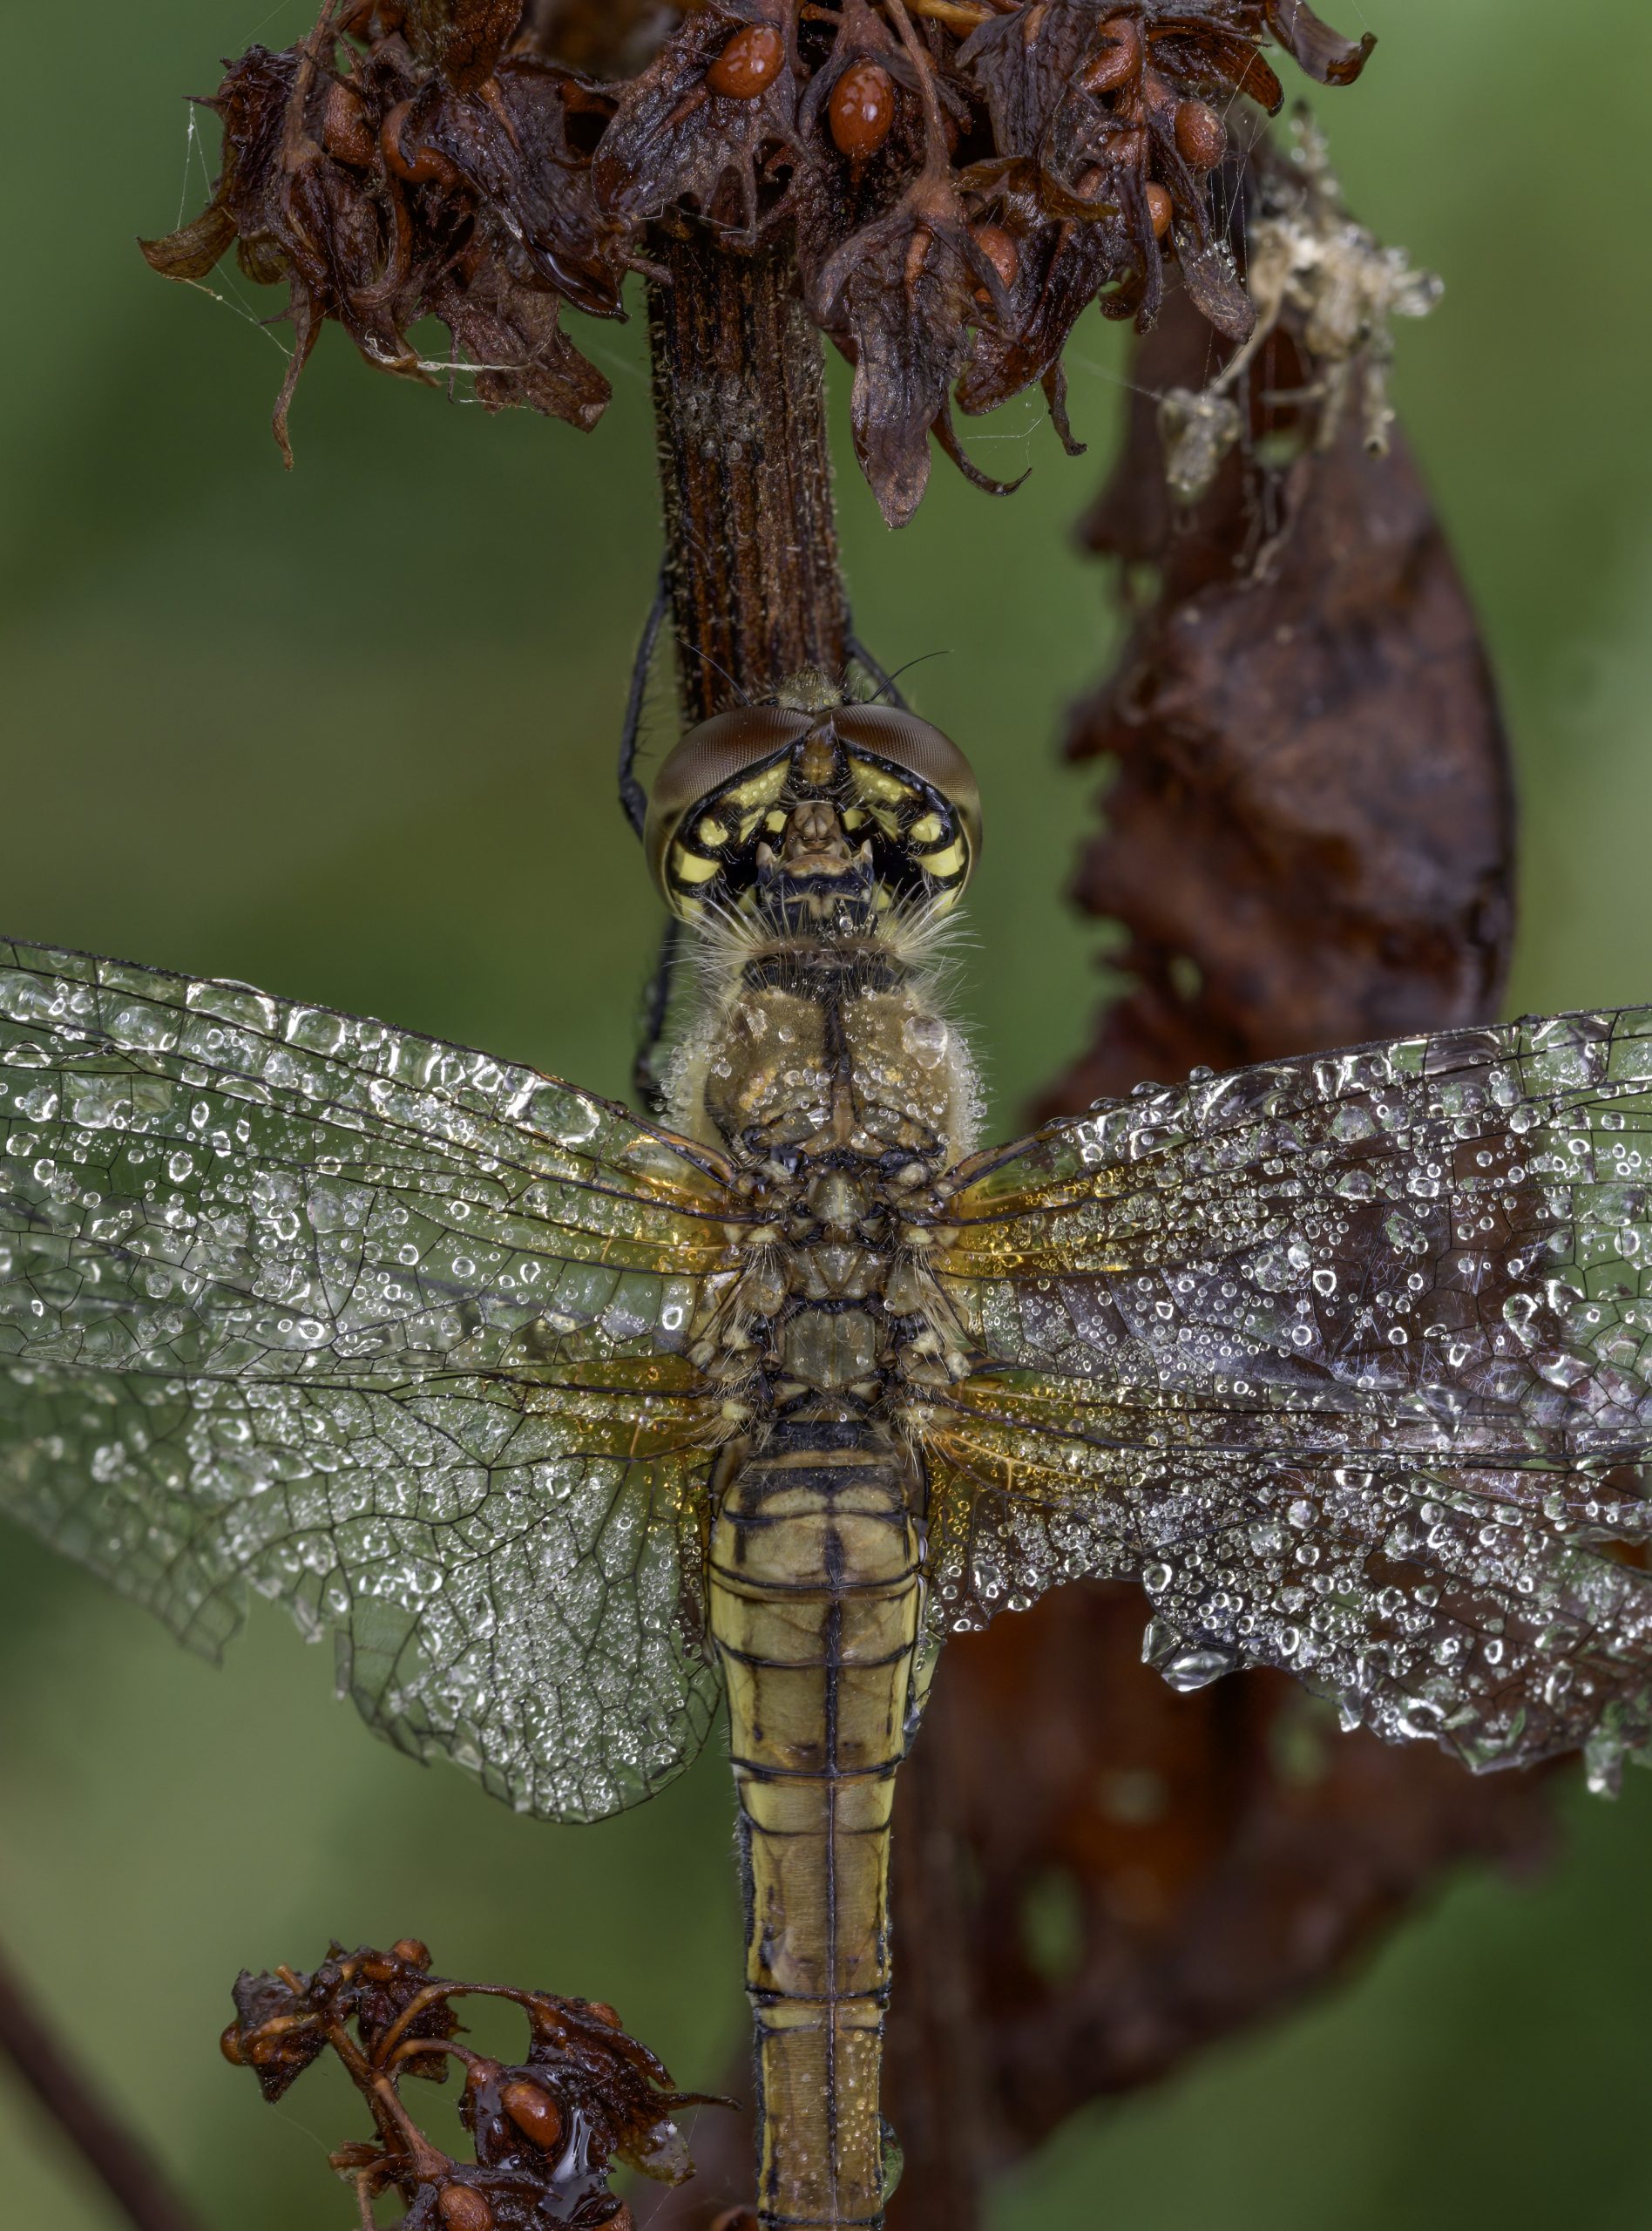 Dragonfly – first foray into macro